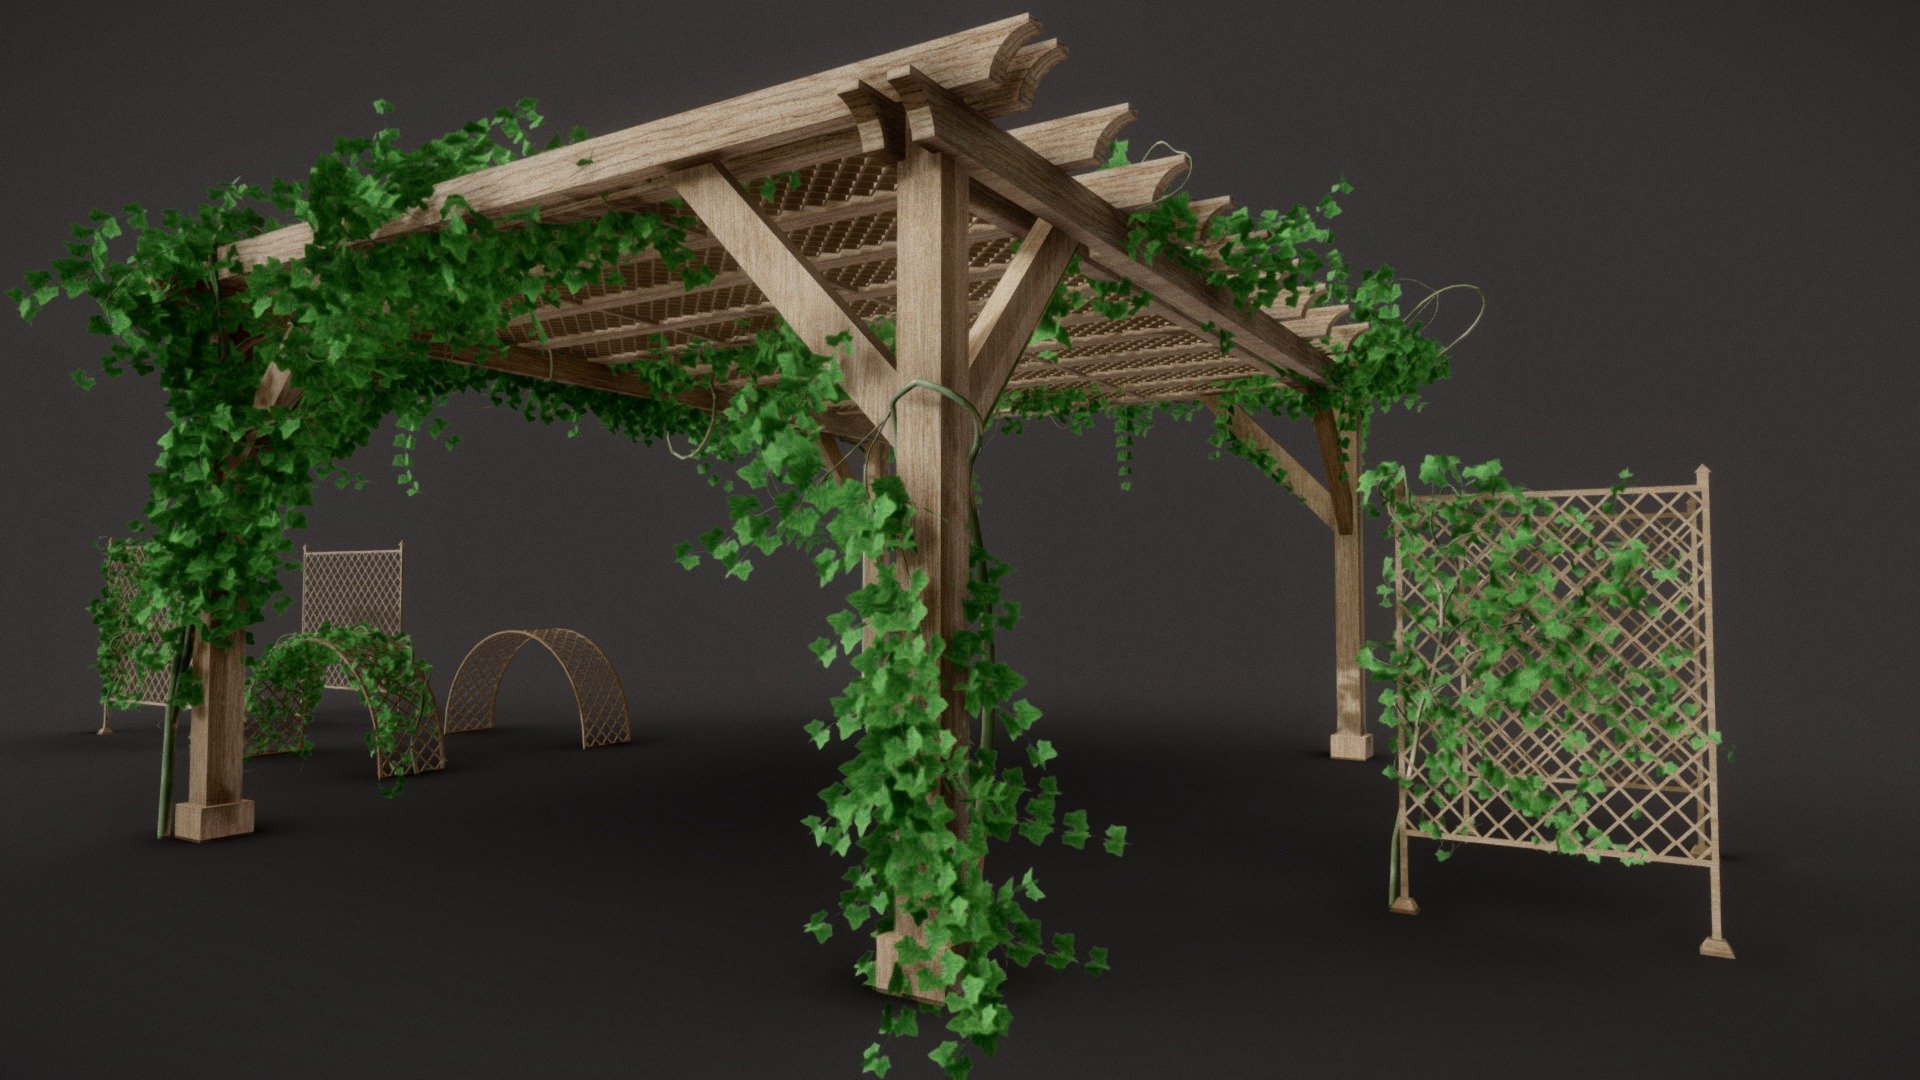 Garden Lattice And Pergola with 4k and 2k textures with vines/ivy.
All the Textures and blend files also included in the additional files.
What you'll get :-
* 5 variety of garden lattice which you can translate, rotate, scale and duplicate according to your requirements.
* 5 variety of garden lattice with vines on it.All the objects are seperated form each other like mesh,leaves and branches are grouped together but are seperated for further treatment.
* you can reuse the vines in your other assets .
* 1 Pergola with vines on it
Thank You! - Garden Lattice And Pergola with Vines/Ivy - Buy Royalty Free 3D model by Nicholas-3D (@Nicholas01) 3d model